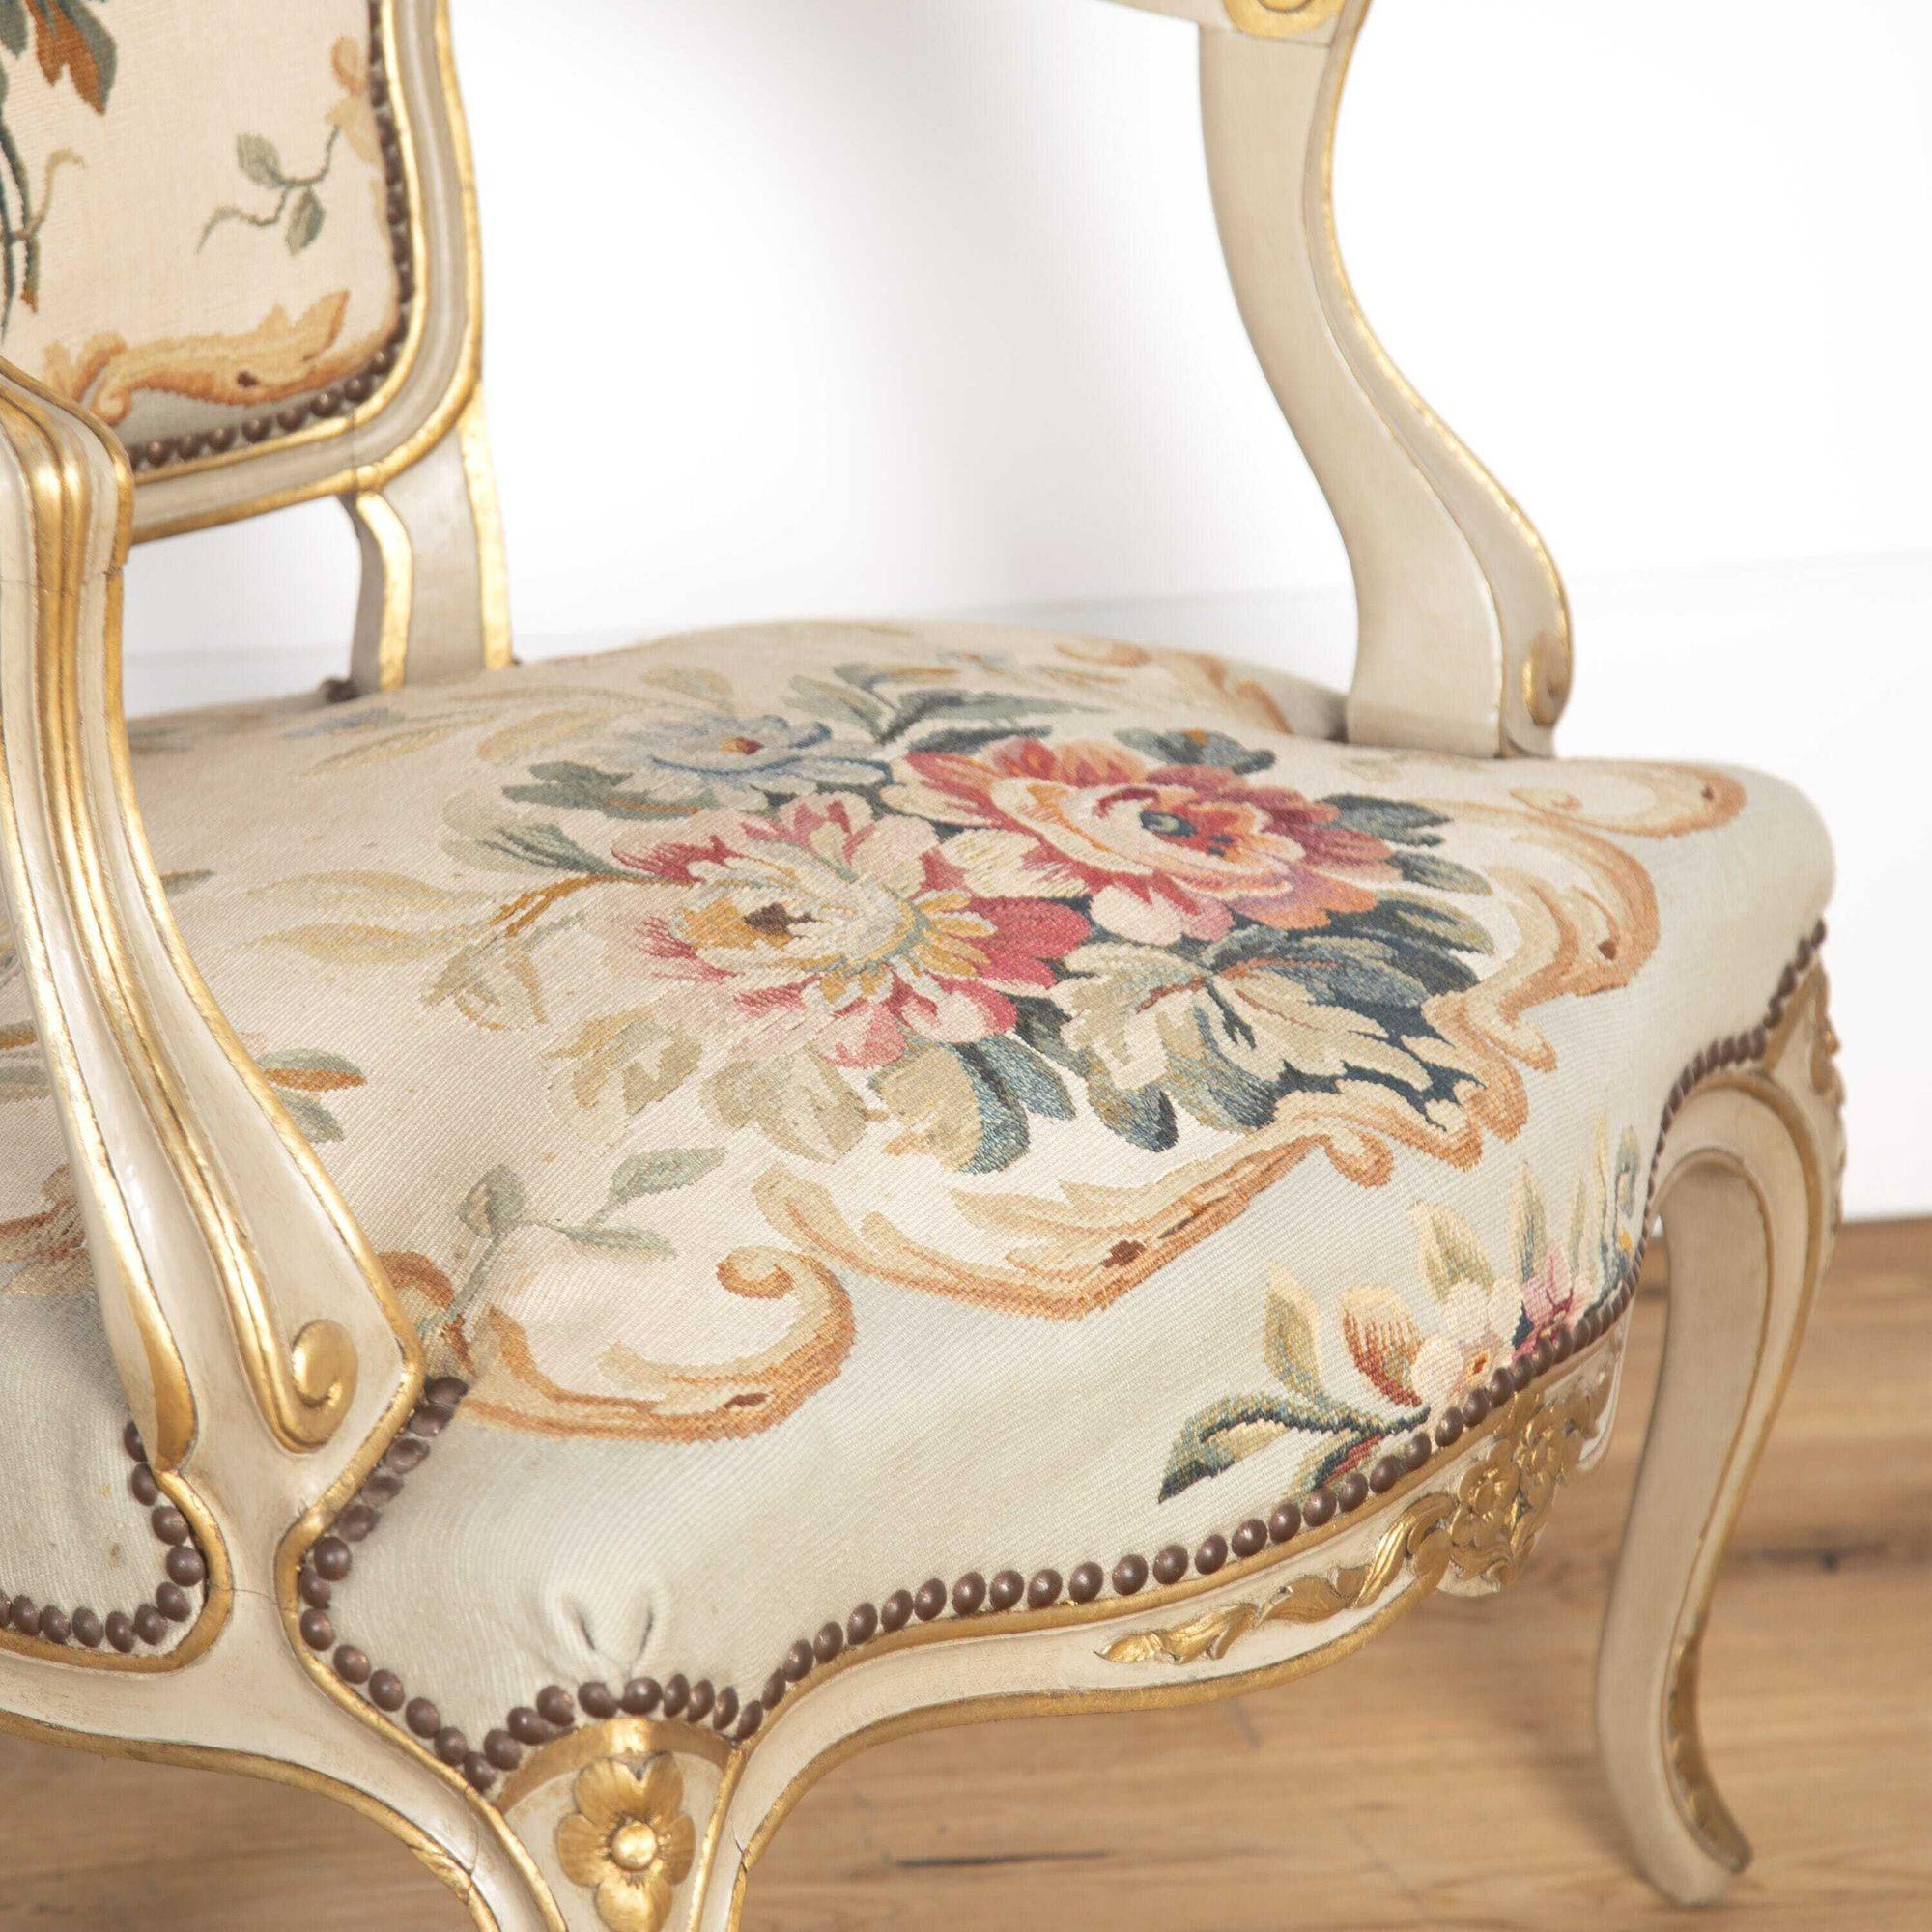 Set of four beautiful mid-19th Century Fauteuils in the Louis XV style. 
With excellent hand-carved details and soft French grey and gilt finish.
With original lovely quality Aubusson tapestry covers. Perfect occasional chairs for a bedroom, library